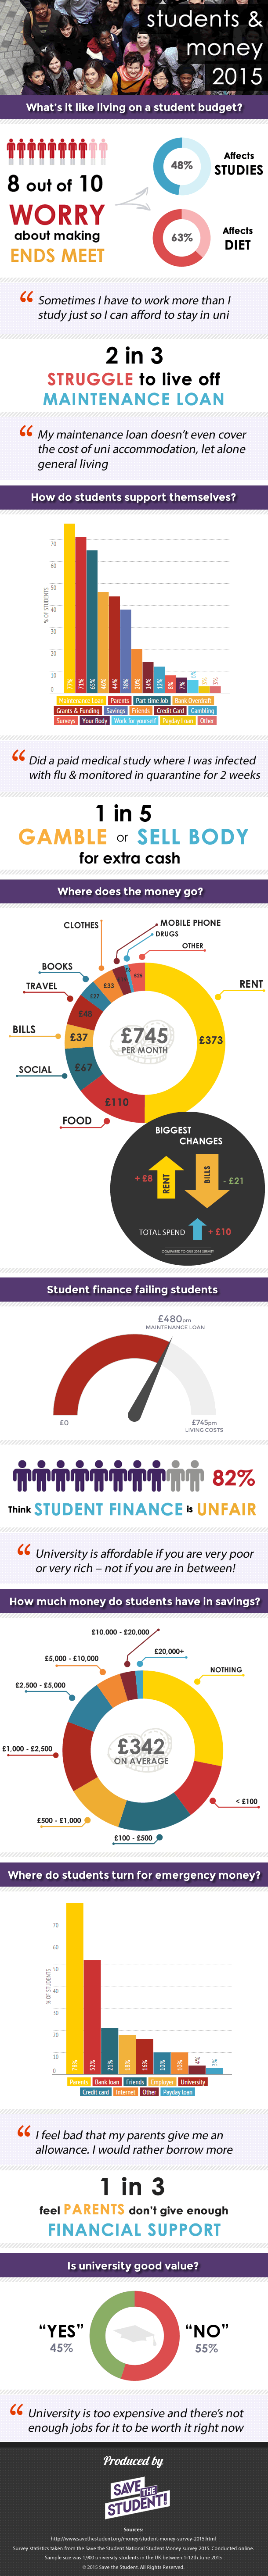 Students and money stats infographic 2015